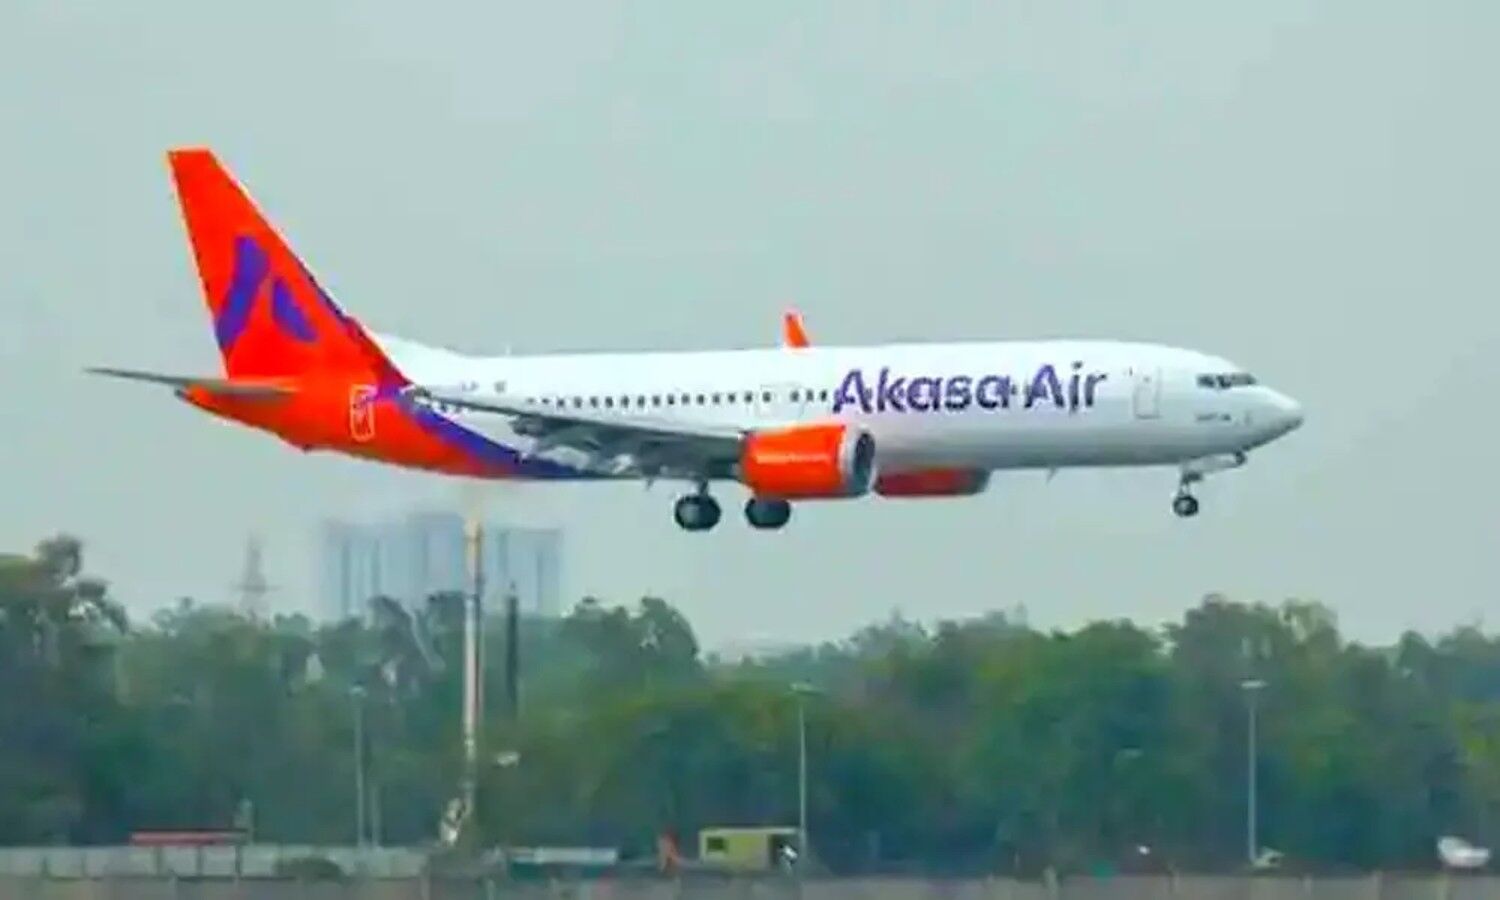 Akasa Air: Akasa Air of Jhunjhunwala is ready for its first flight, know all about it